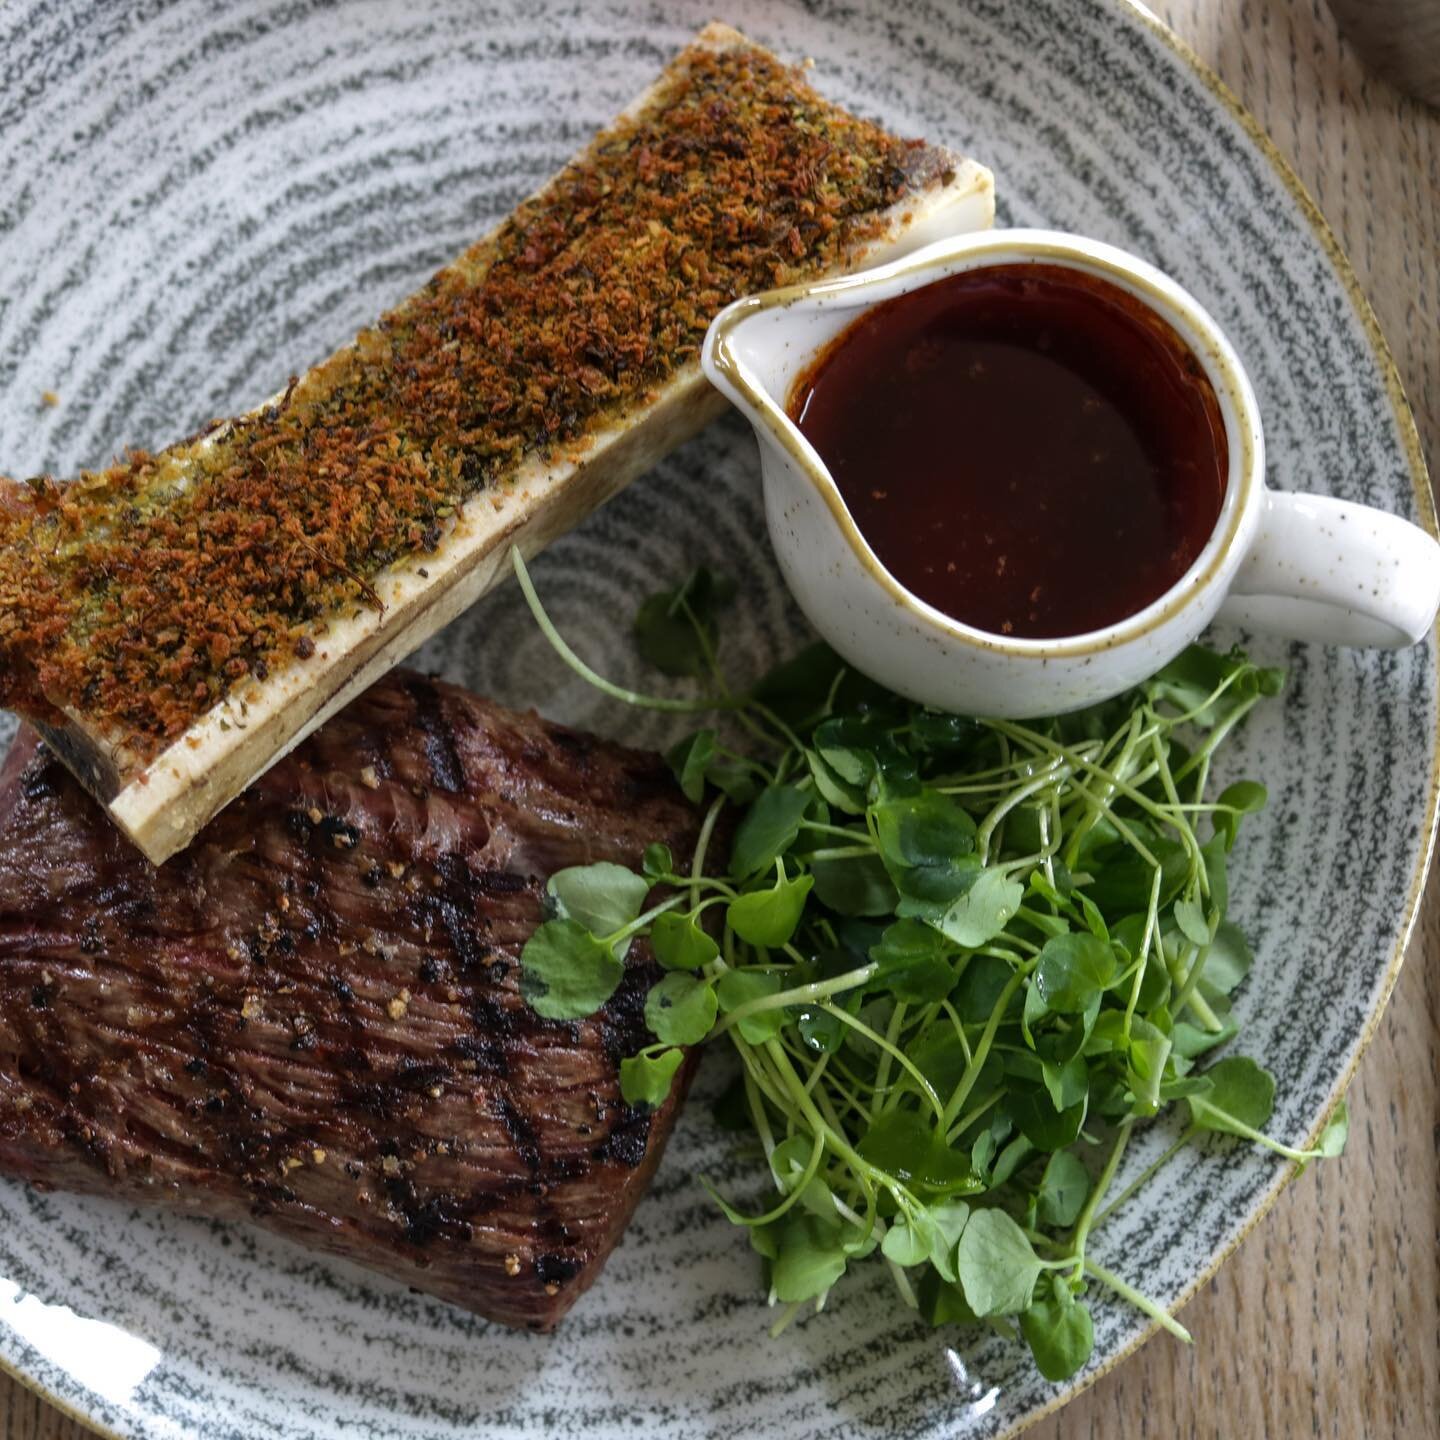 Every Monday&amp;Tuesday from 5pm join us for our fantastic Steak night. Ask your Waiter for wine recommendation to pair with your meal 🍷

The Hillgate, steak night, red wine, Notting Hill, evening 

#steaknight #thehillgate #thehillgatepub #londonp